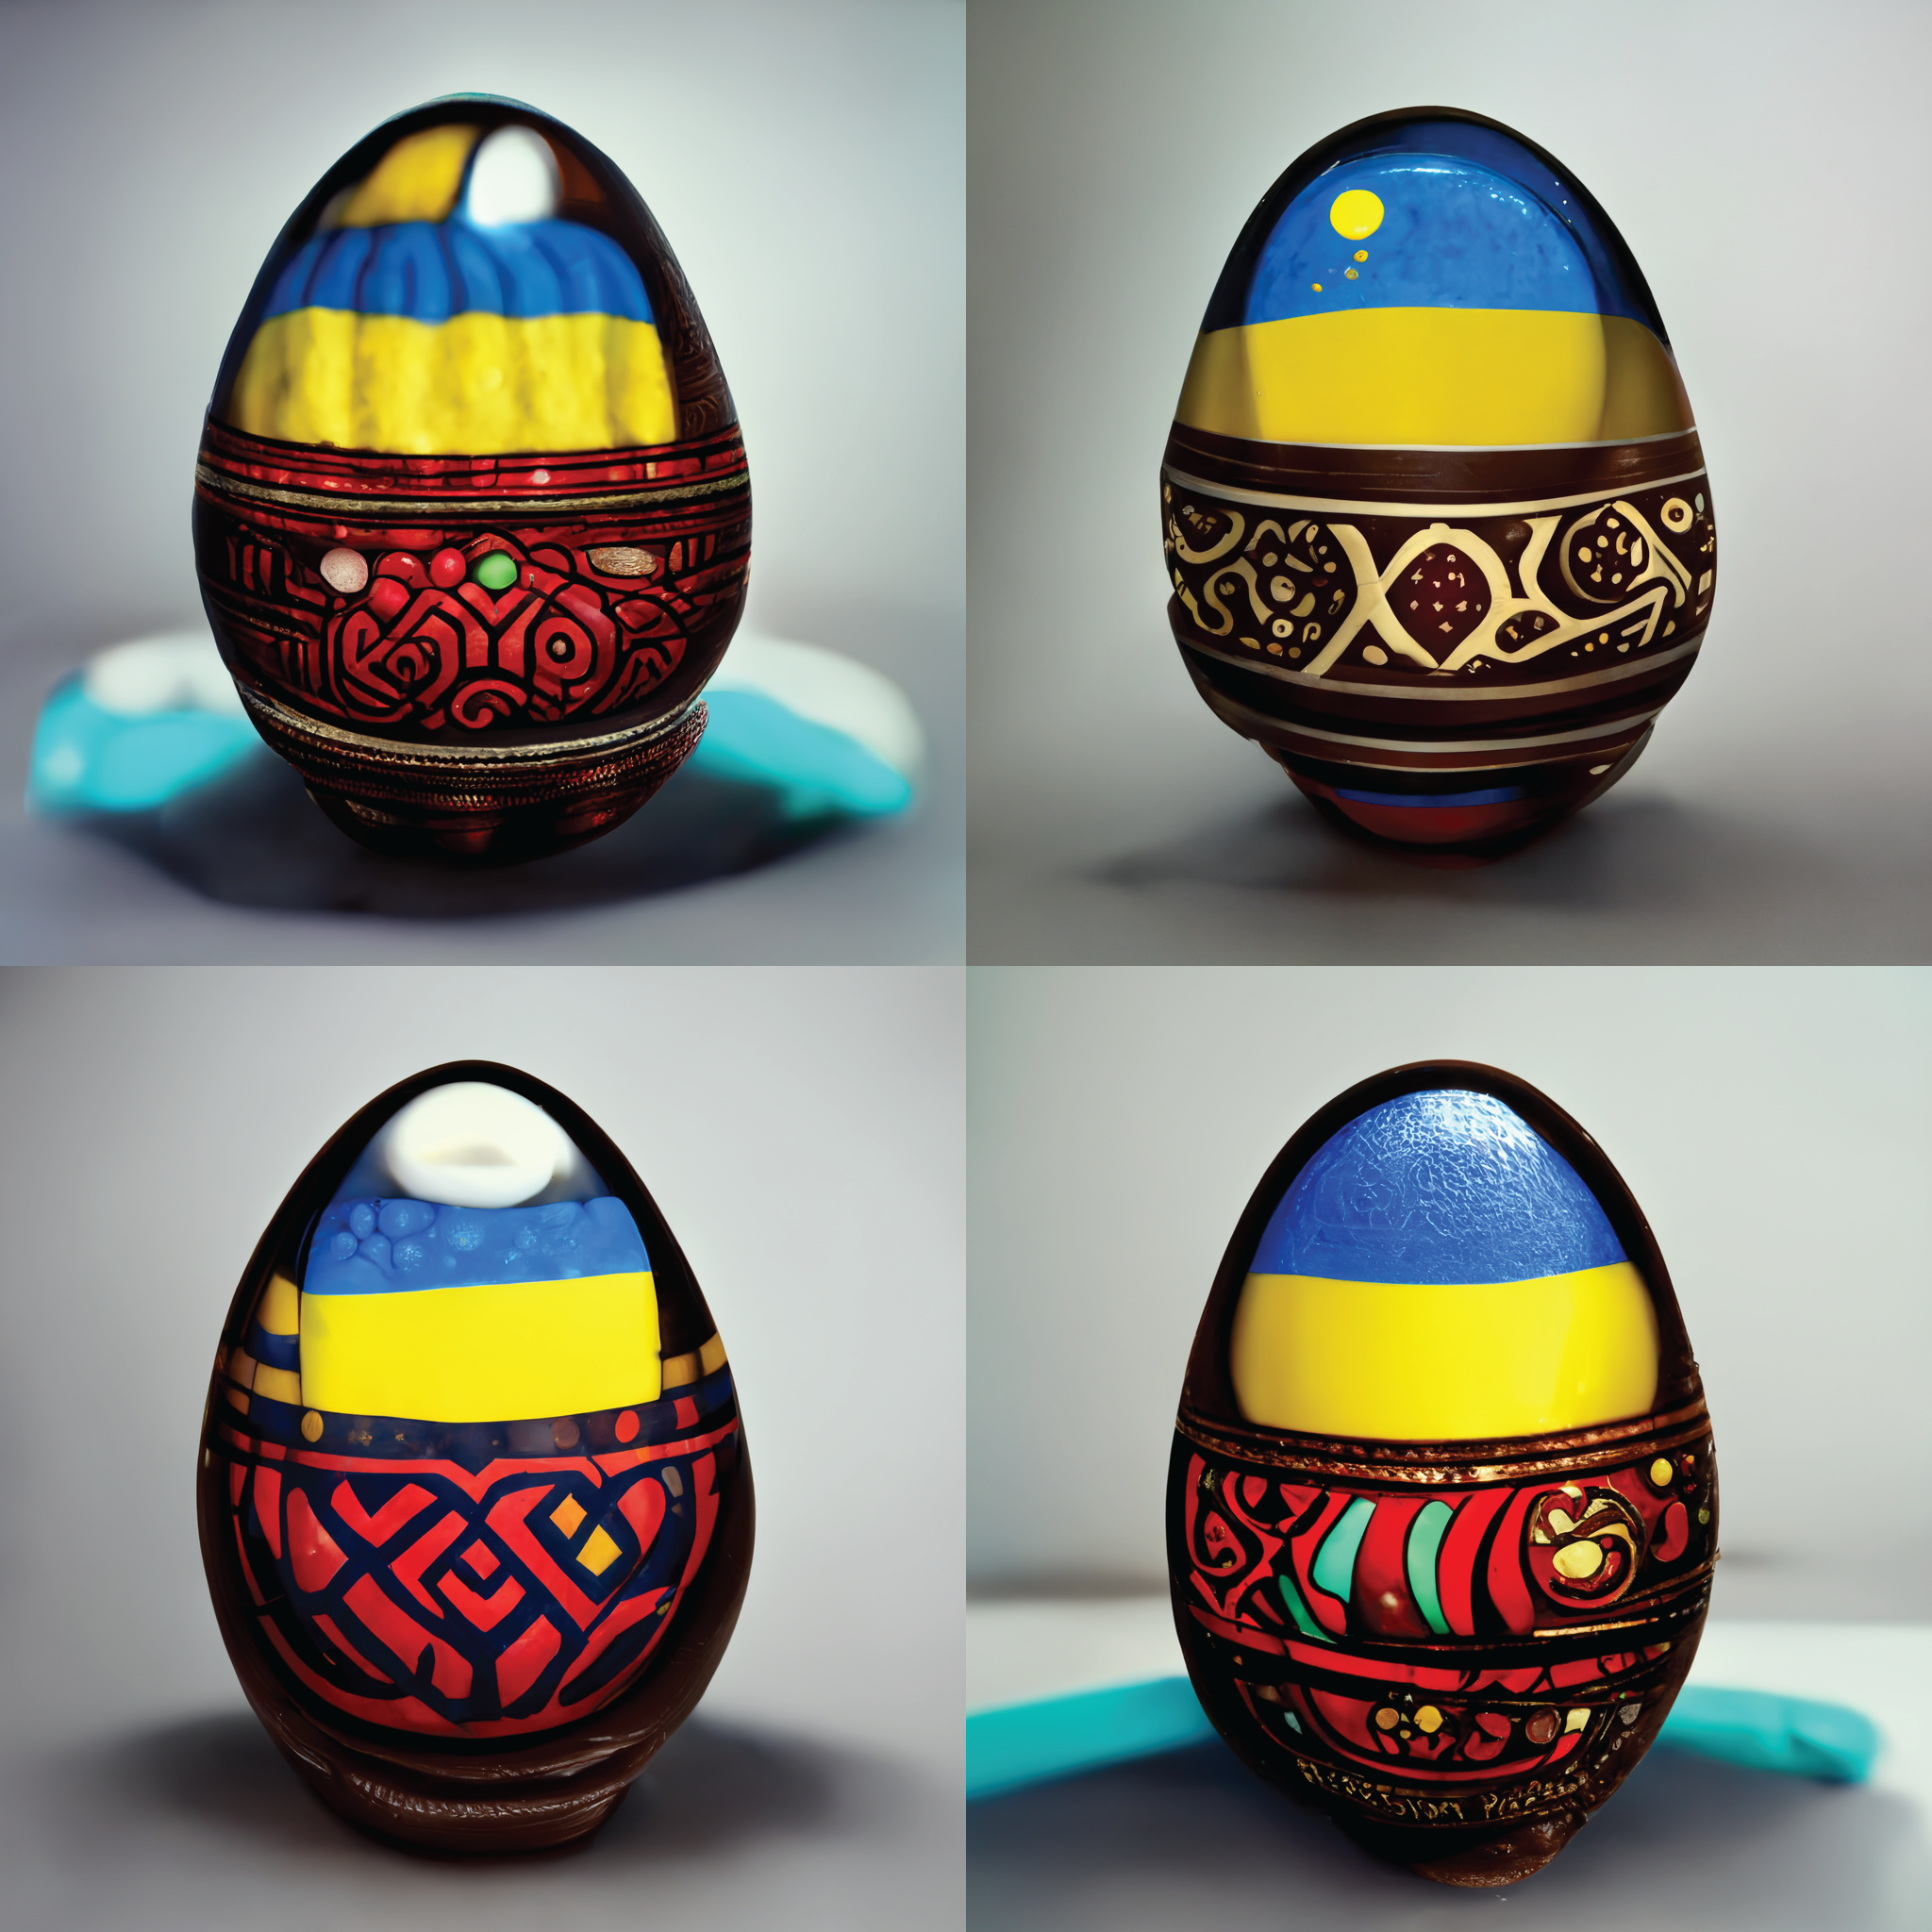 Glasslike eggs whose bottoms are decorated with geometrical red and black patterns and whose tops have the blue and yellow pattern of the Ukranian flag. Here and there are dots of yellow like egg yolks. Or maybe that's just me.